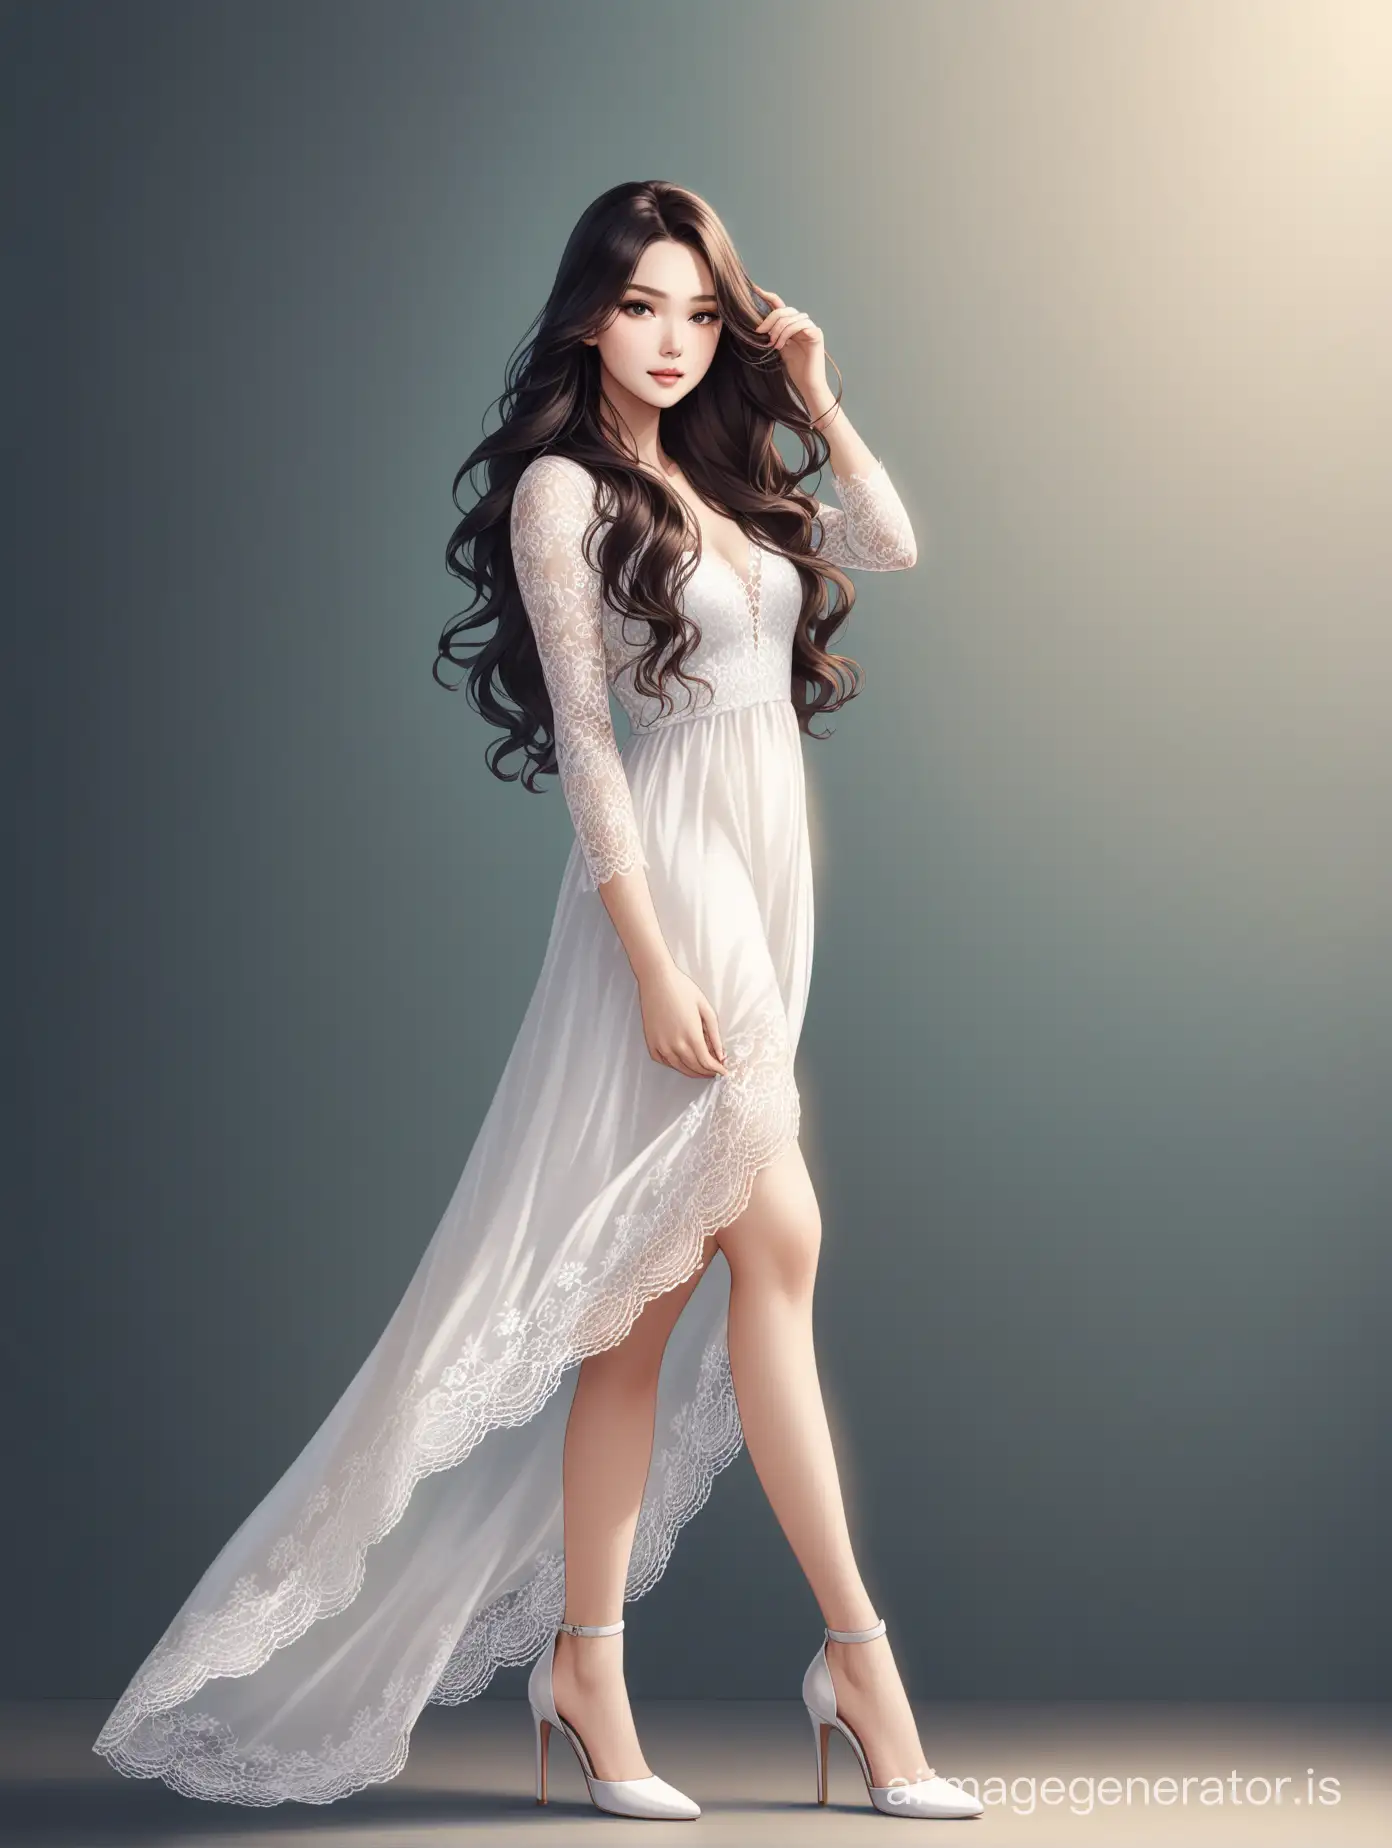 Elegant-Woman-in-White-Lace-Dress-with-Flowing-Dark-Wavy-Hair-and-High-Heels